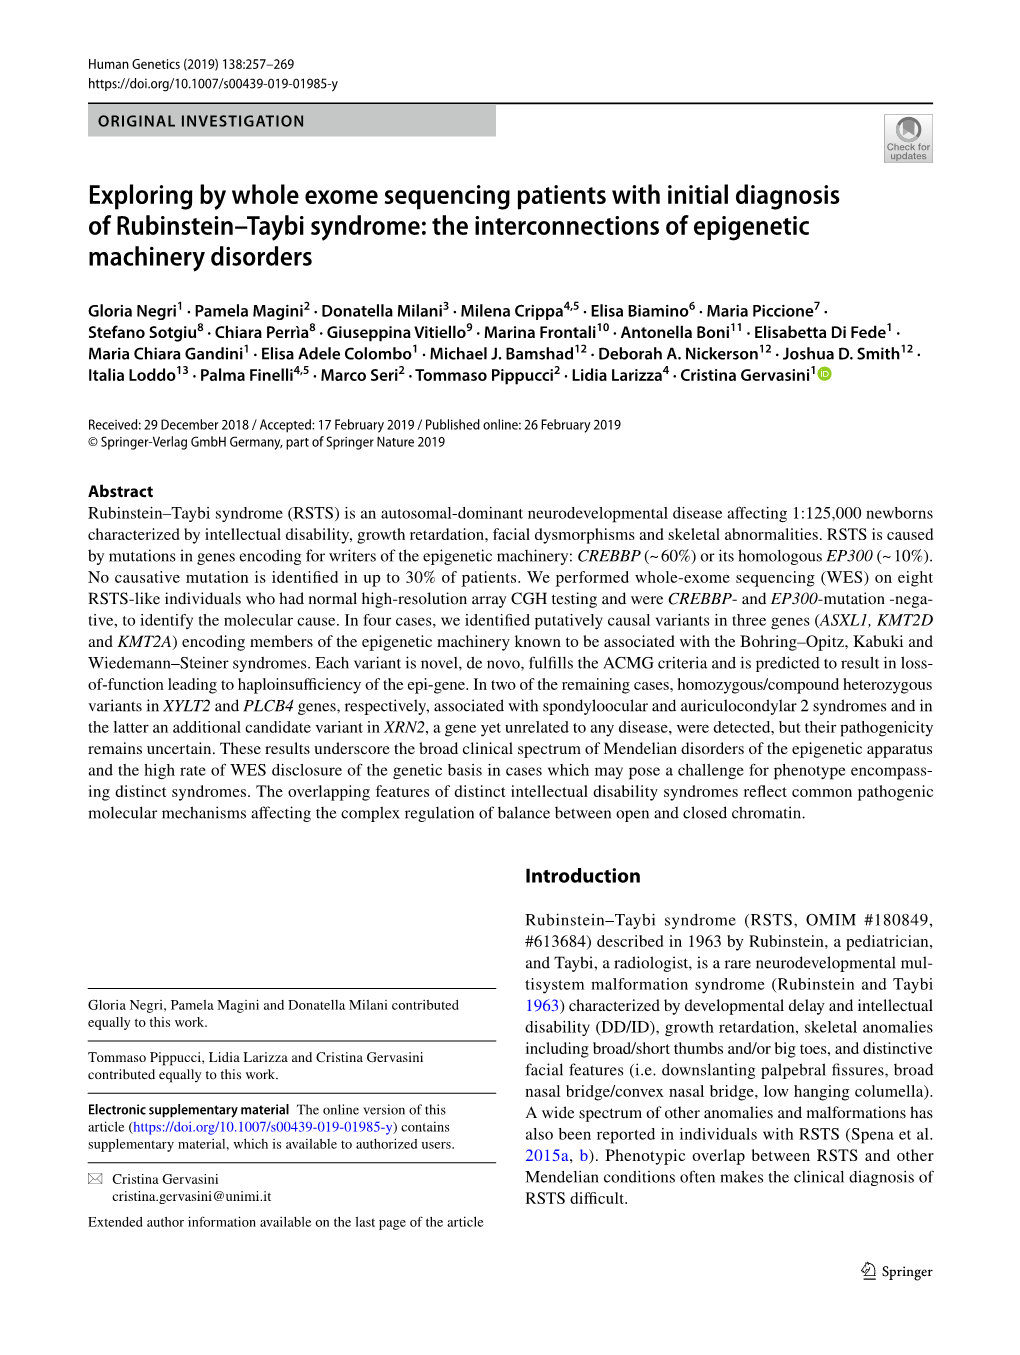 Exploring by Whole Exome Sequencing Patients with Initial Diagnosis of Rubinstein–Taybi Syndrome: the Interconnections of Epigenetic Machinery Disorders